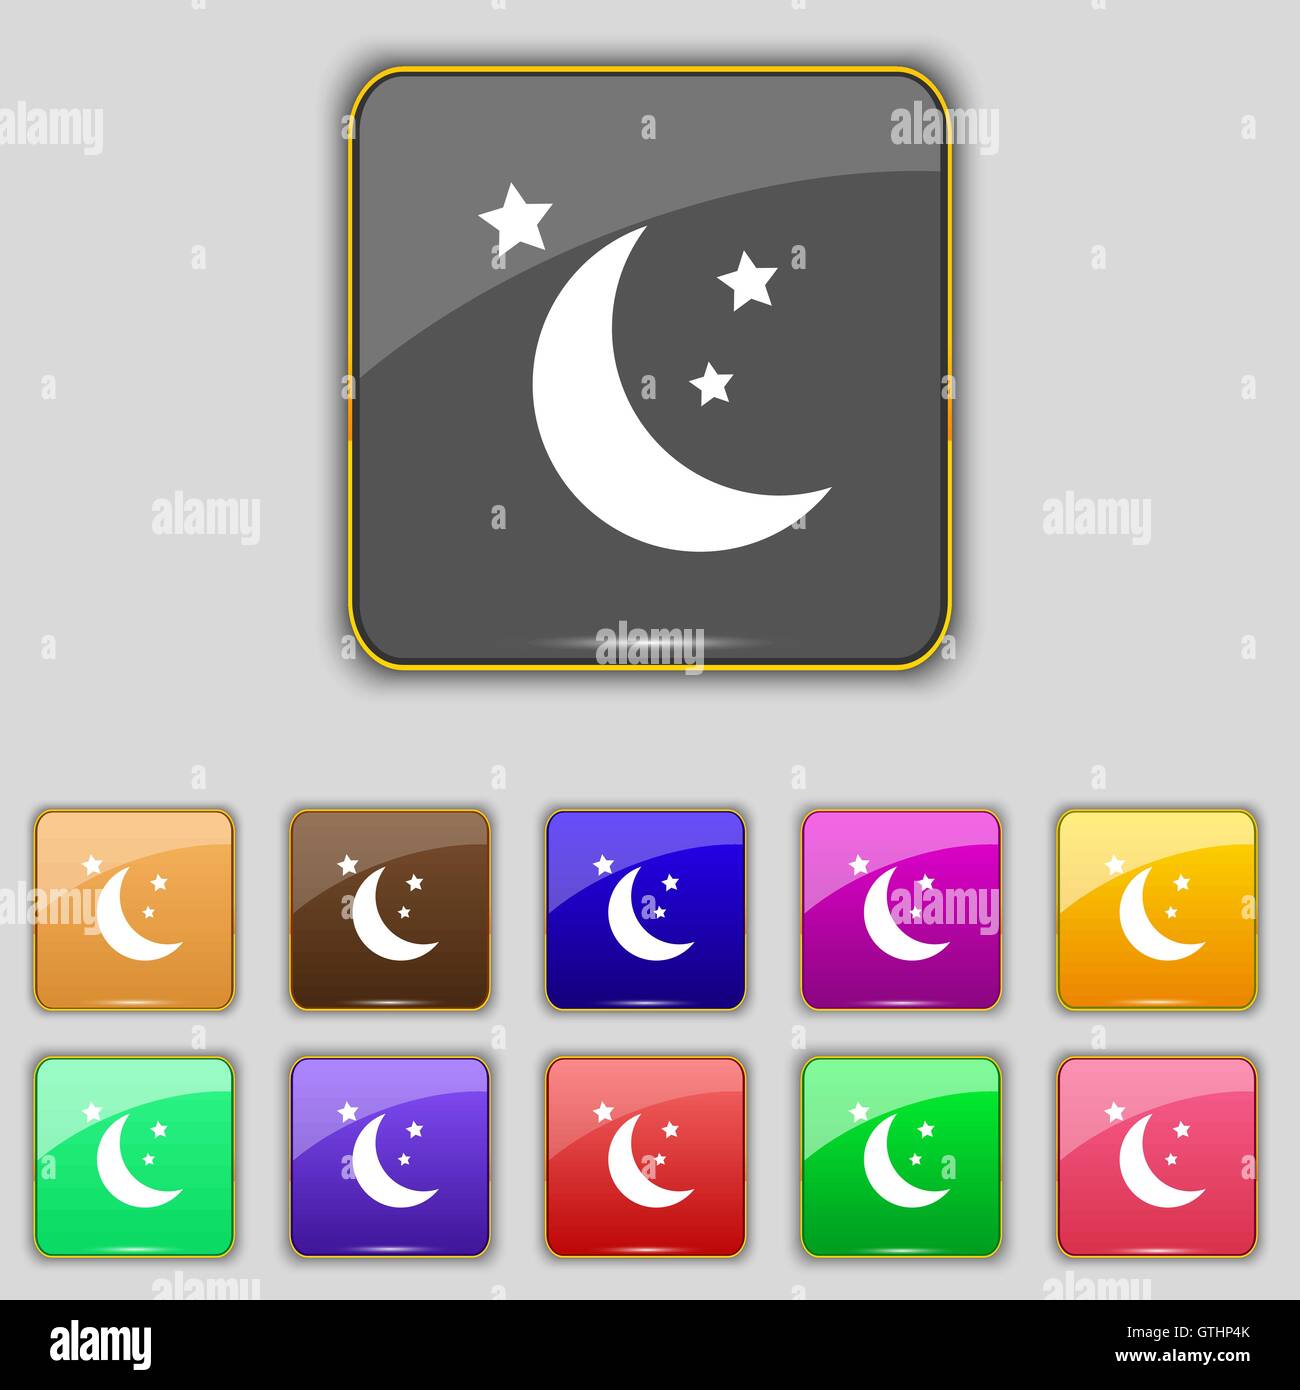 https://c8.alamy.com/comp/GTHP4K/moon-icon-sign-set-with-eleven-colored-buttons-for-your-site-vector-GTHP4K.jpg